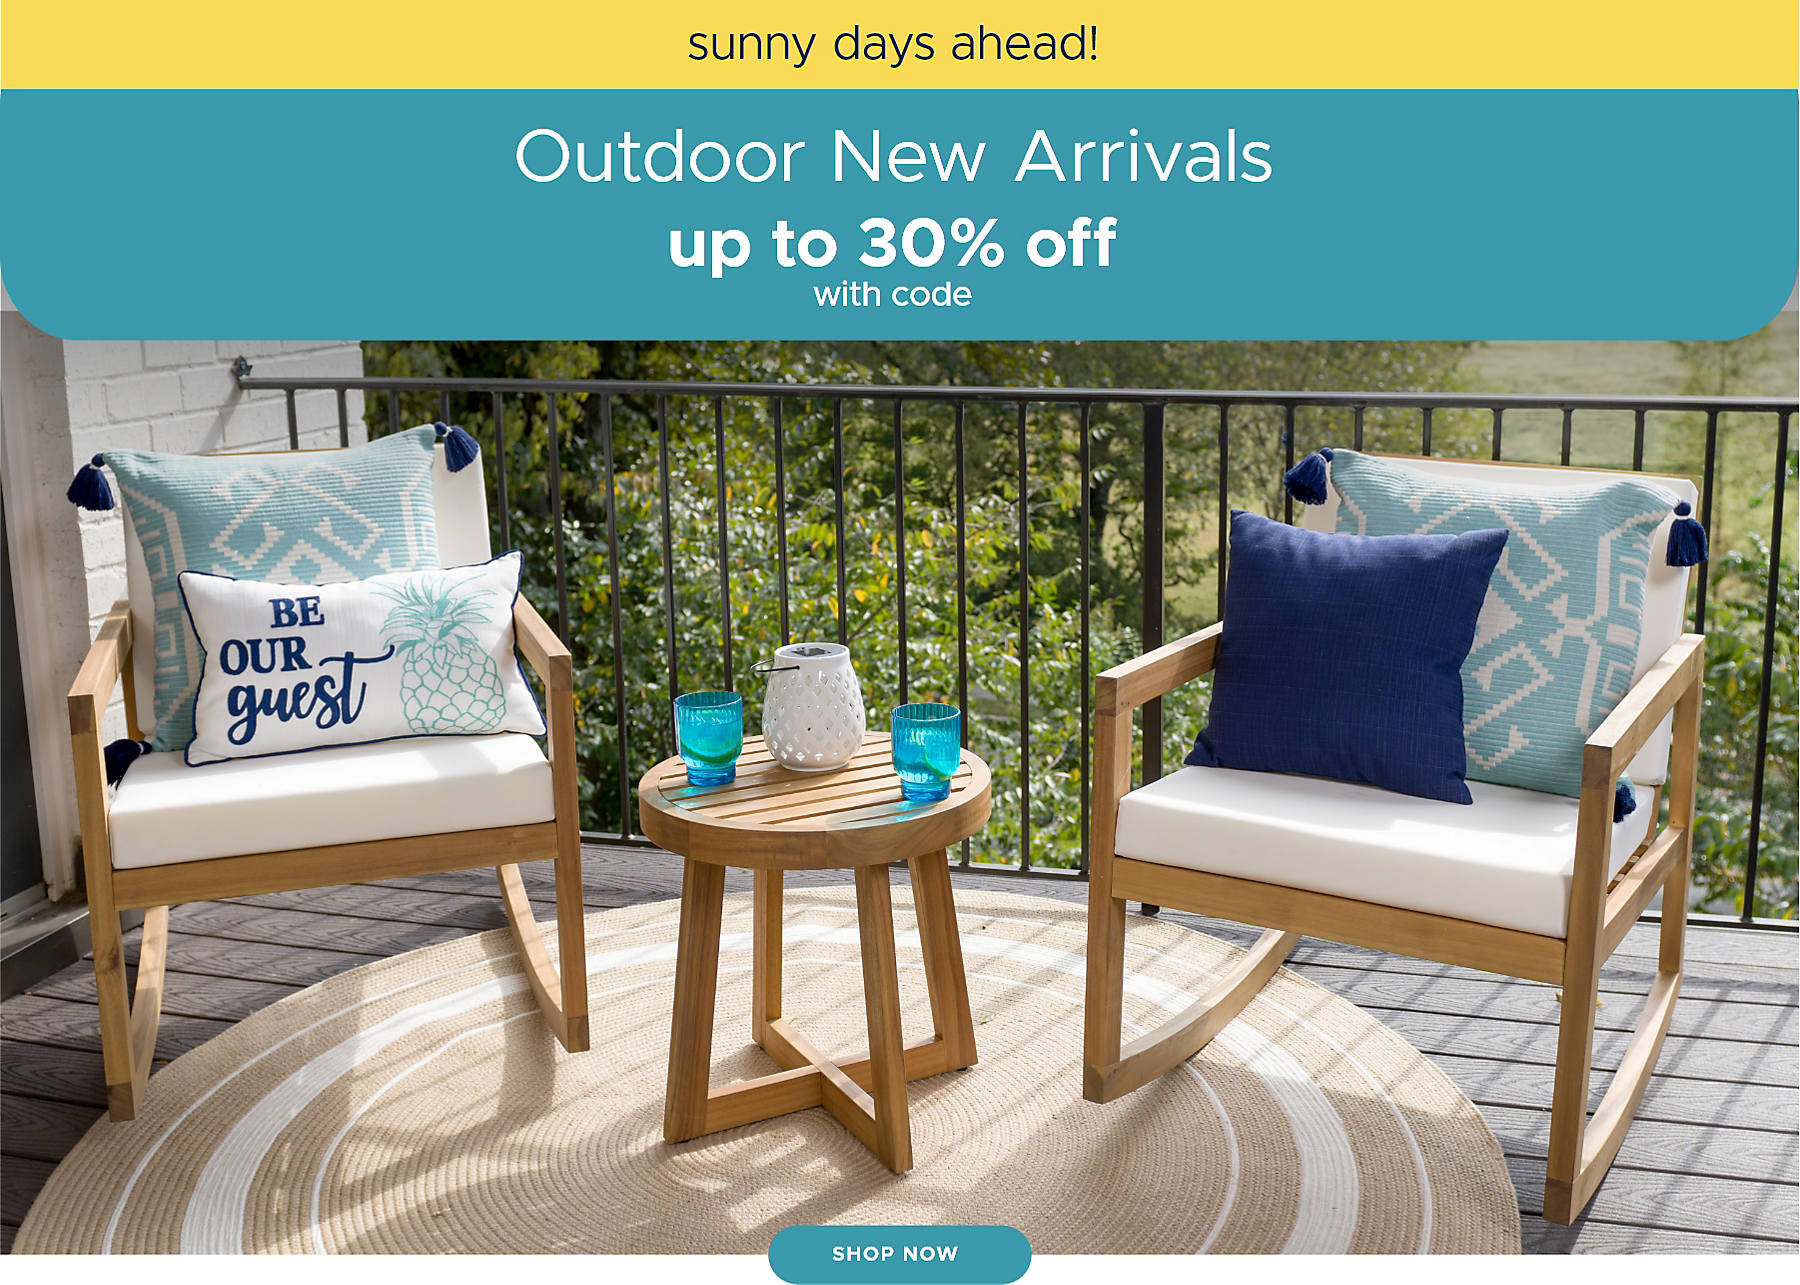 Sunny Days Ahead! Outdoor New Arrivals up to 30% off with code shop now